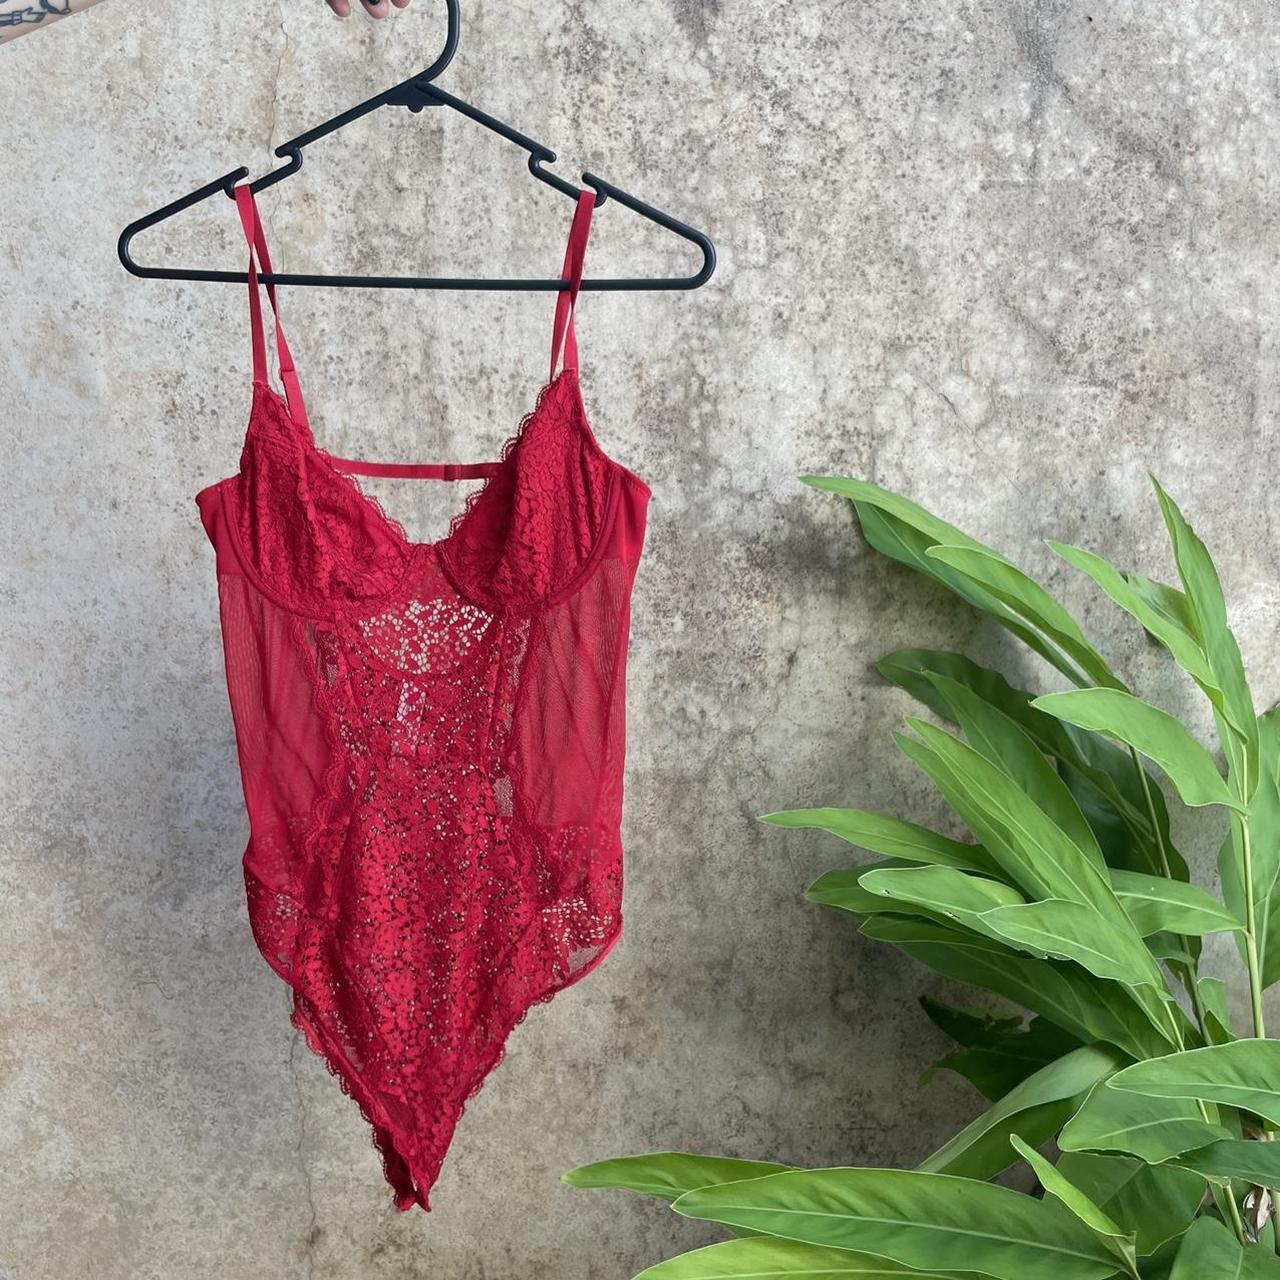 Red lace bodysuit from Glassons ️ #glassons - Depop